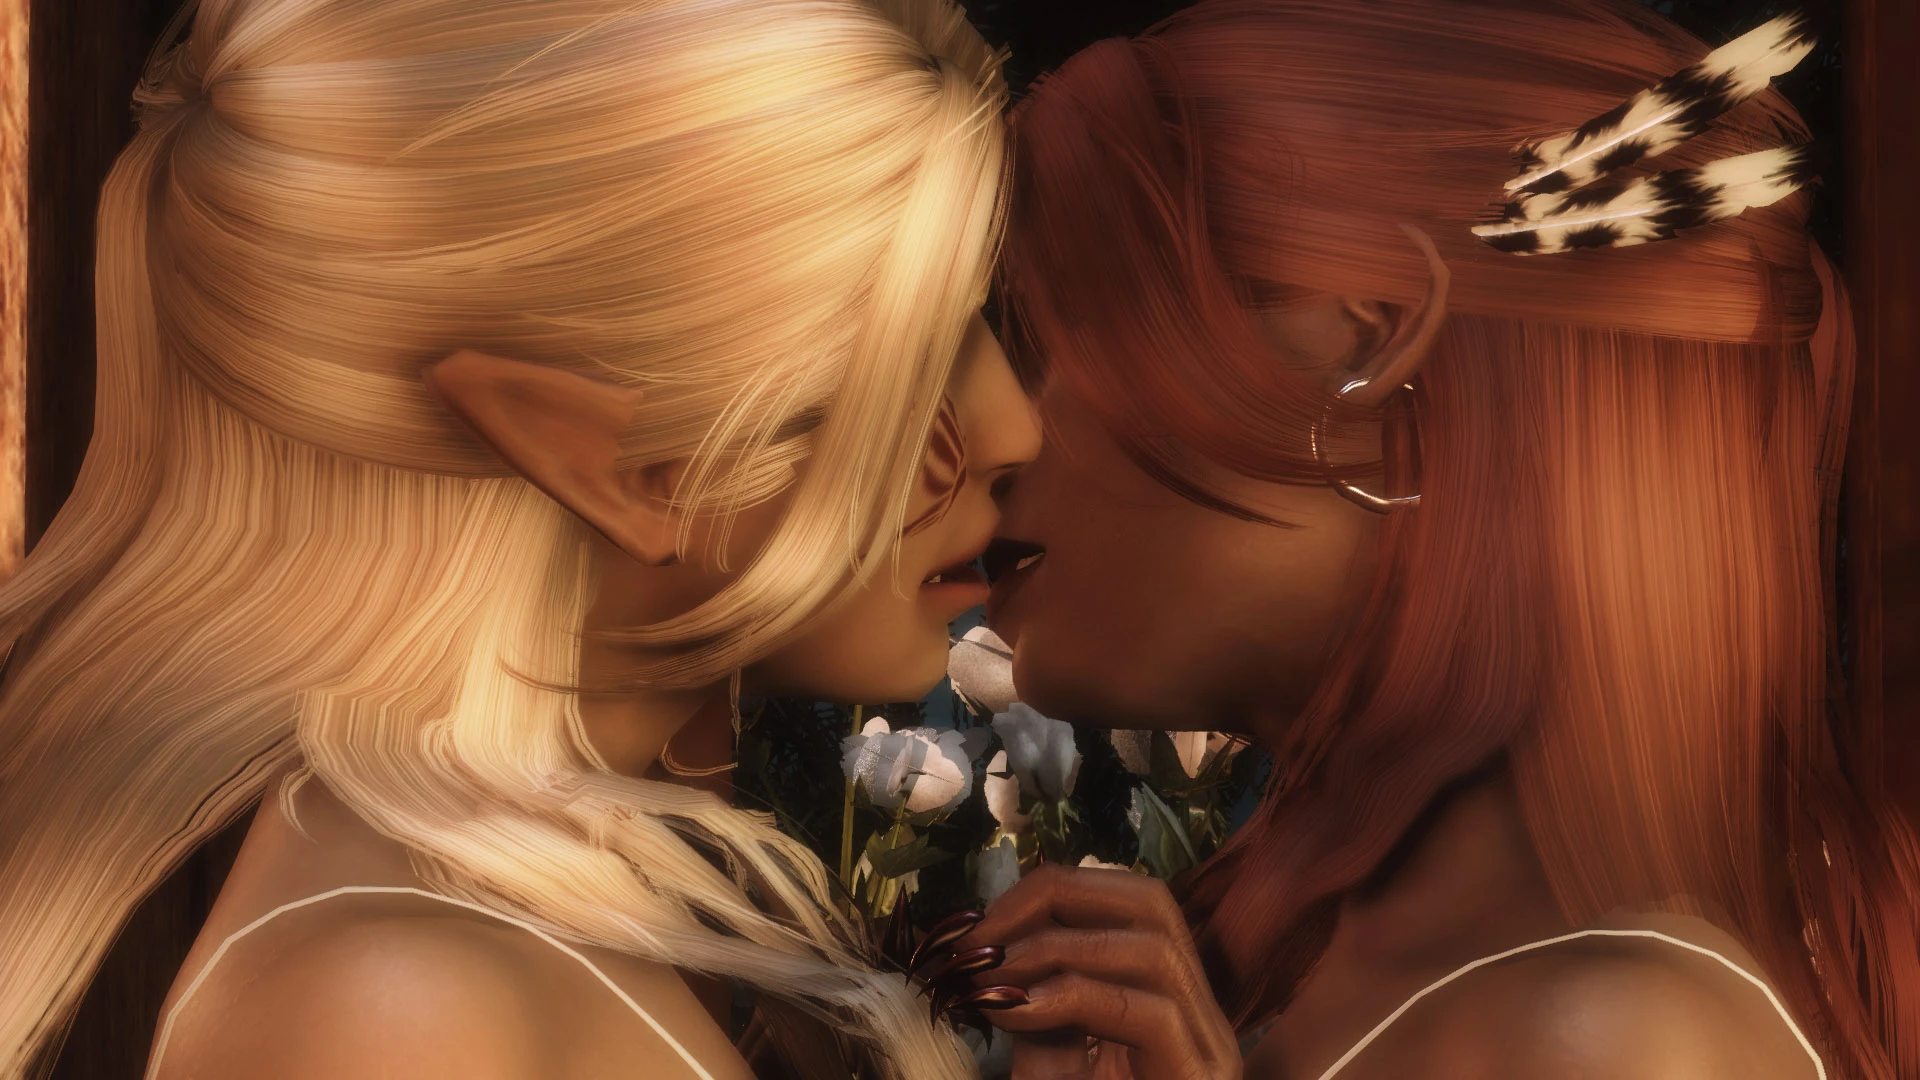 Vrconk threesome with sexy blonde elves